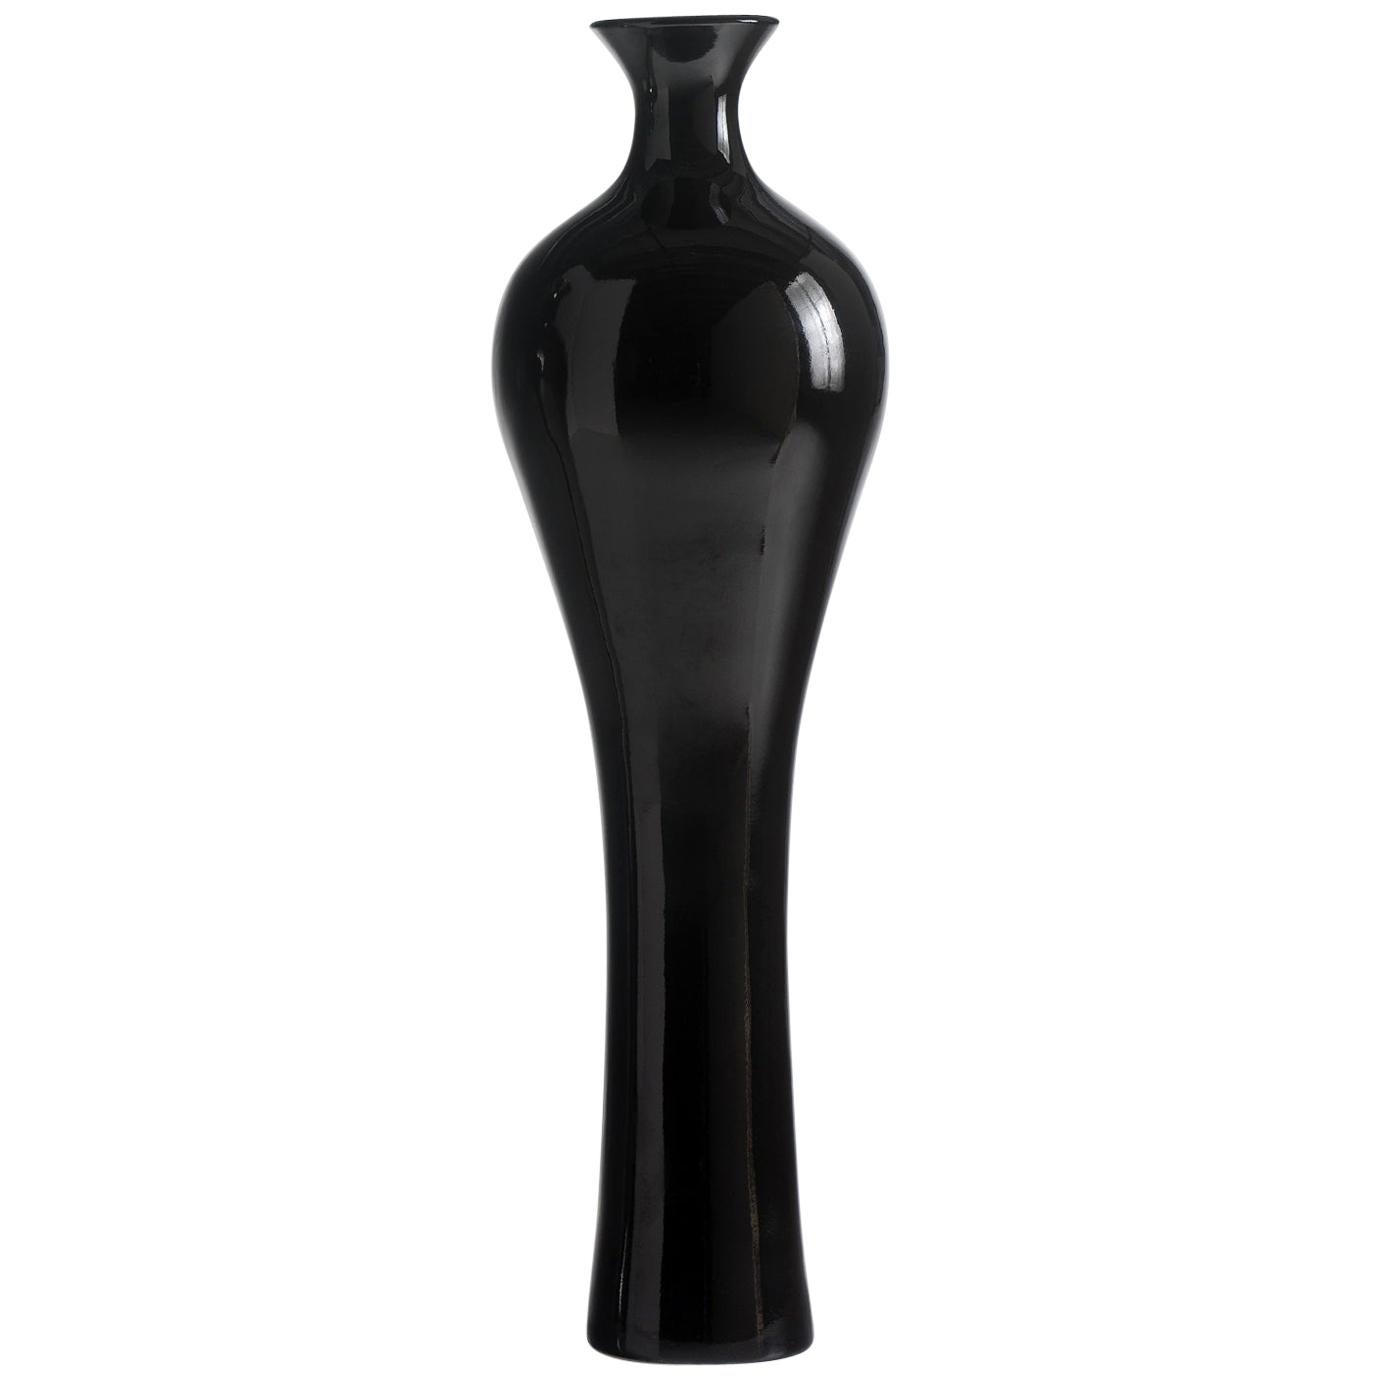 Ceramic Vase "PAMELA" Handcrafted in Black by Gabriella B. Made in Italy For Sale